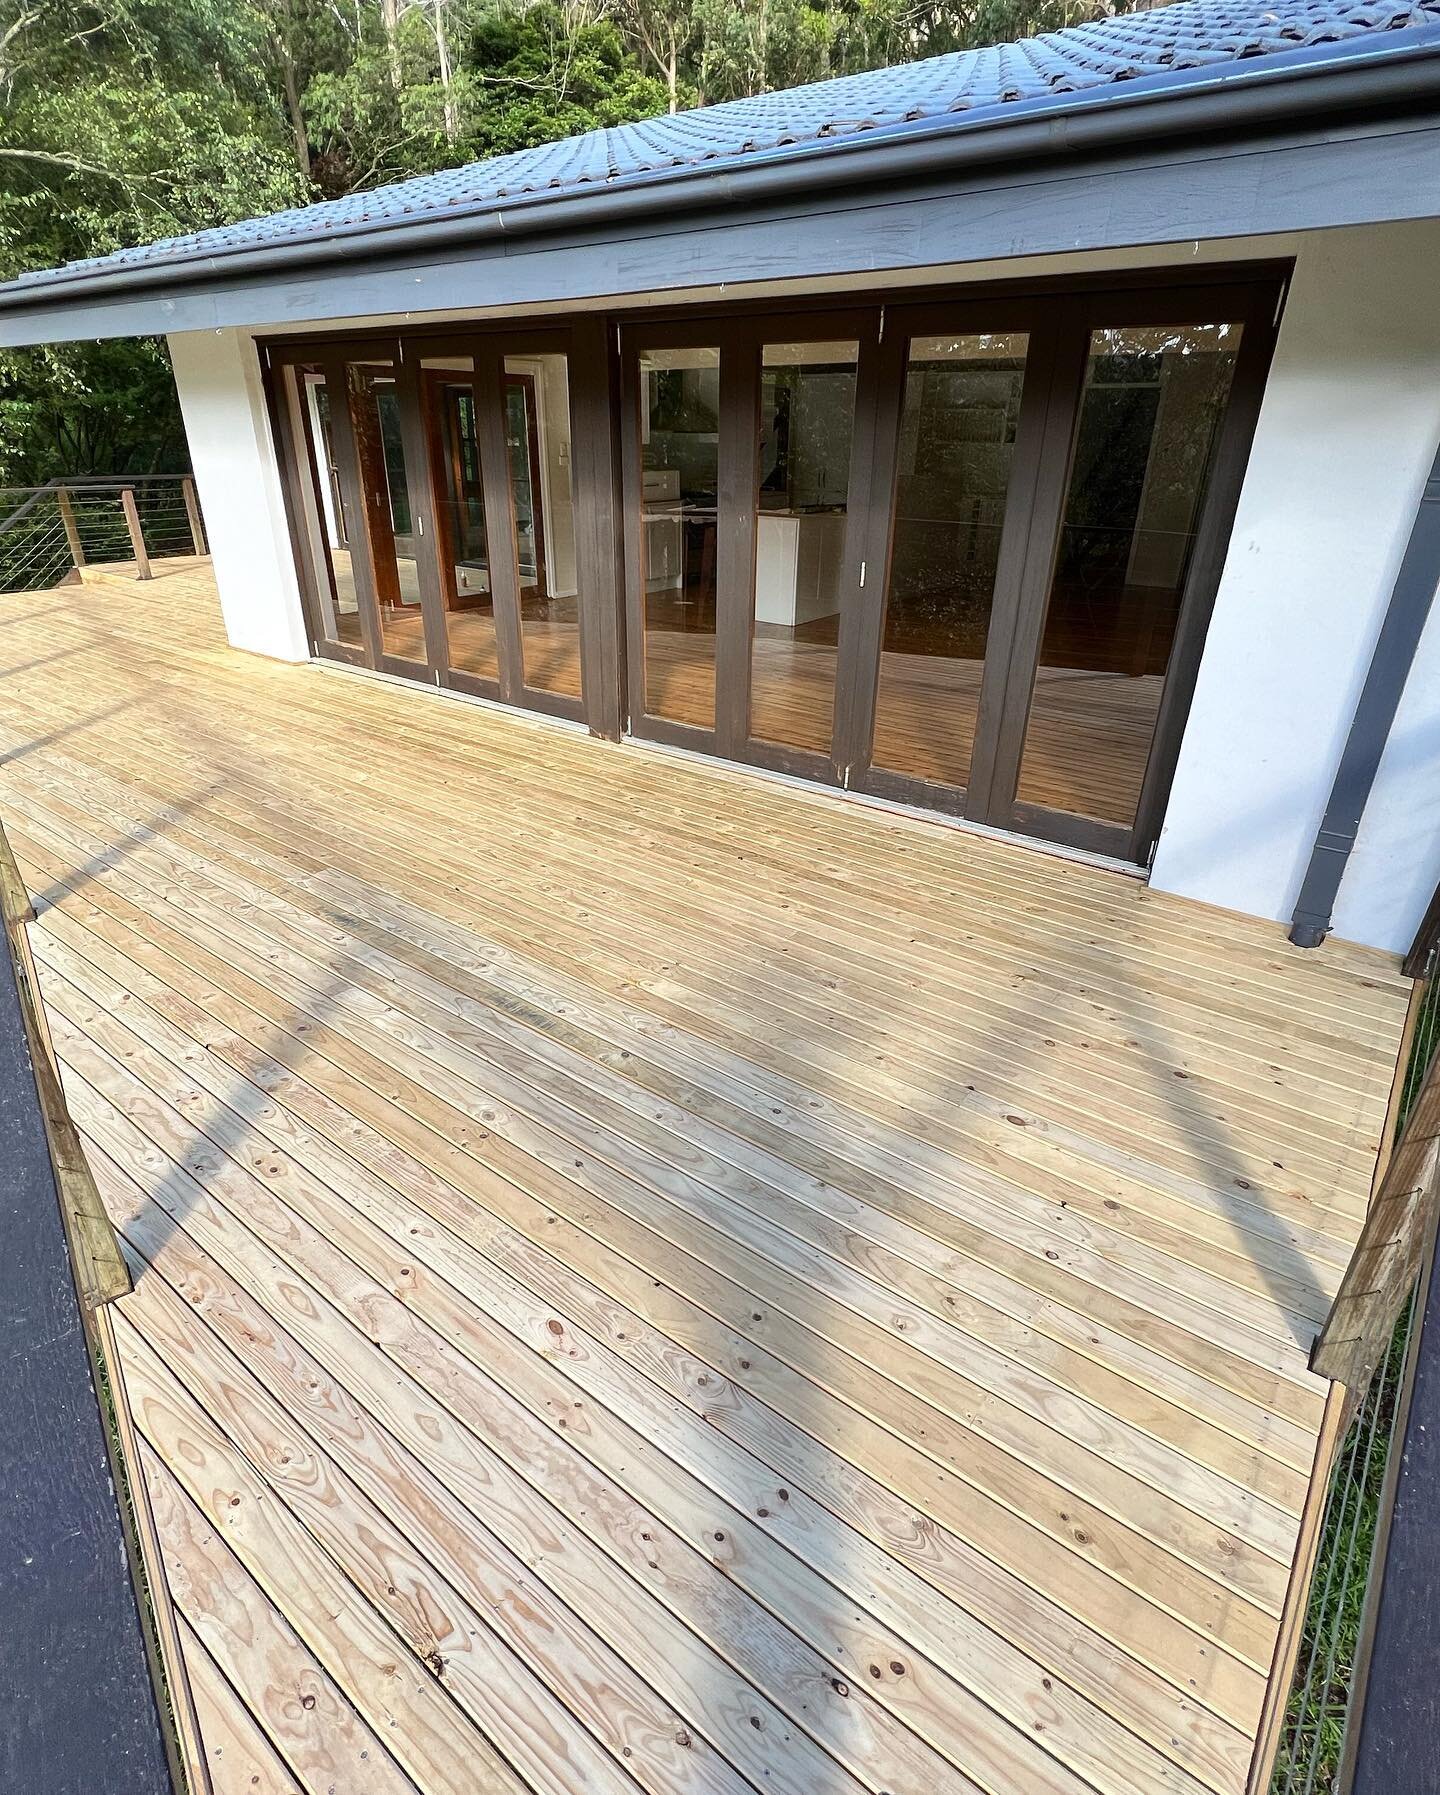 Photos of our recently completed decking project at Bowral.

Our team removed the existing deck, replaced all joists and installed a new treated pine deck to give this recently purchased home a refresh. 

Swipe left to see the before and after photos